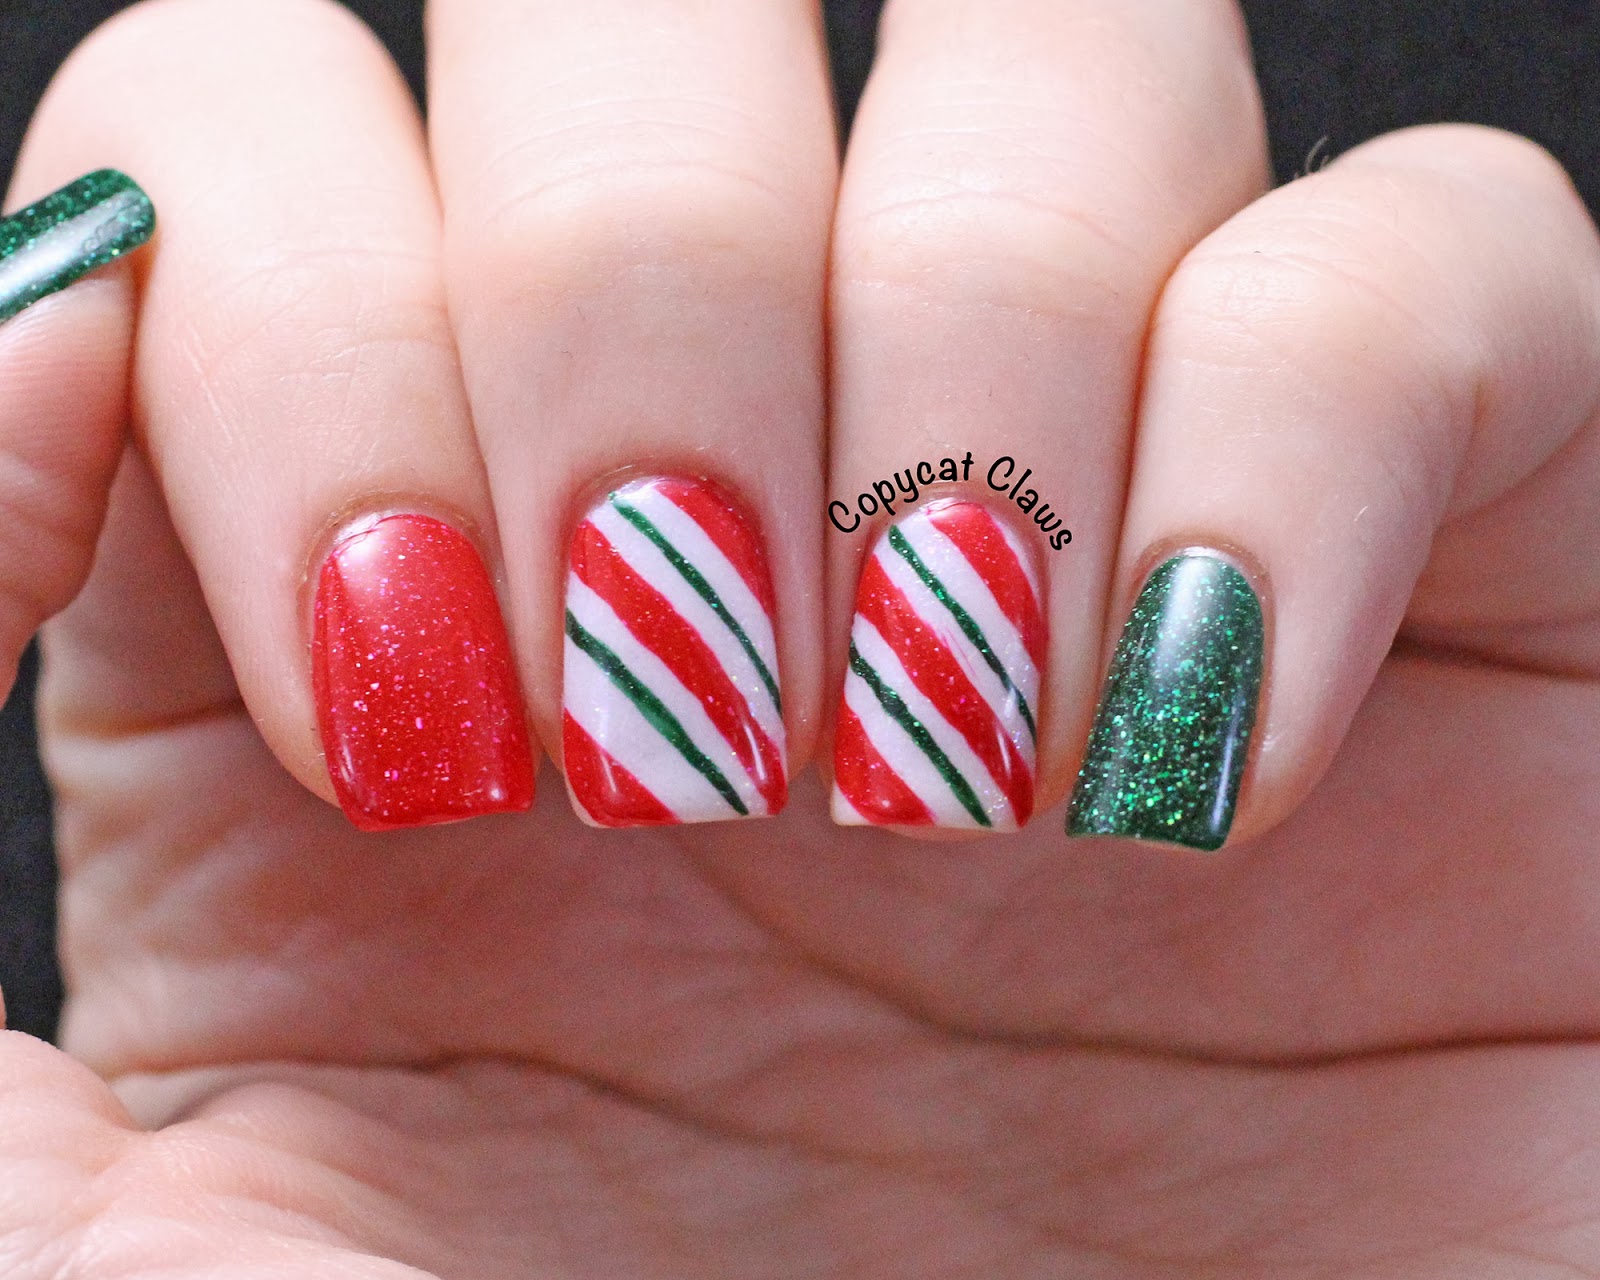 4. Candy Cane Accent Nail Design - wide 4